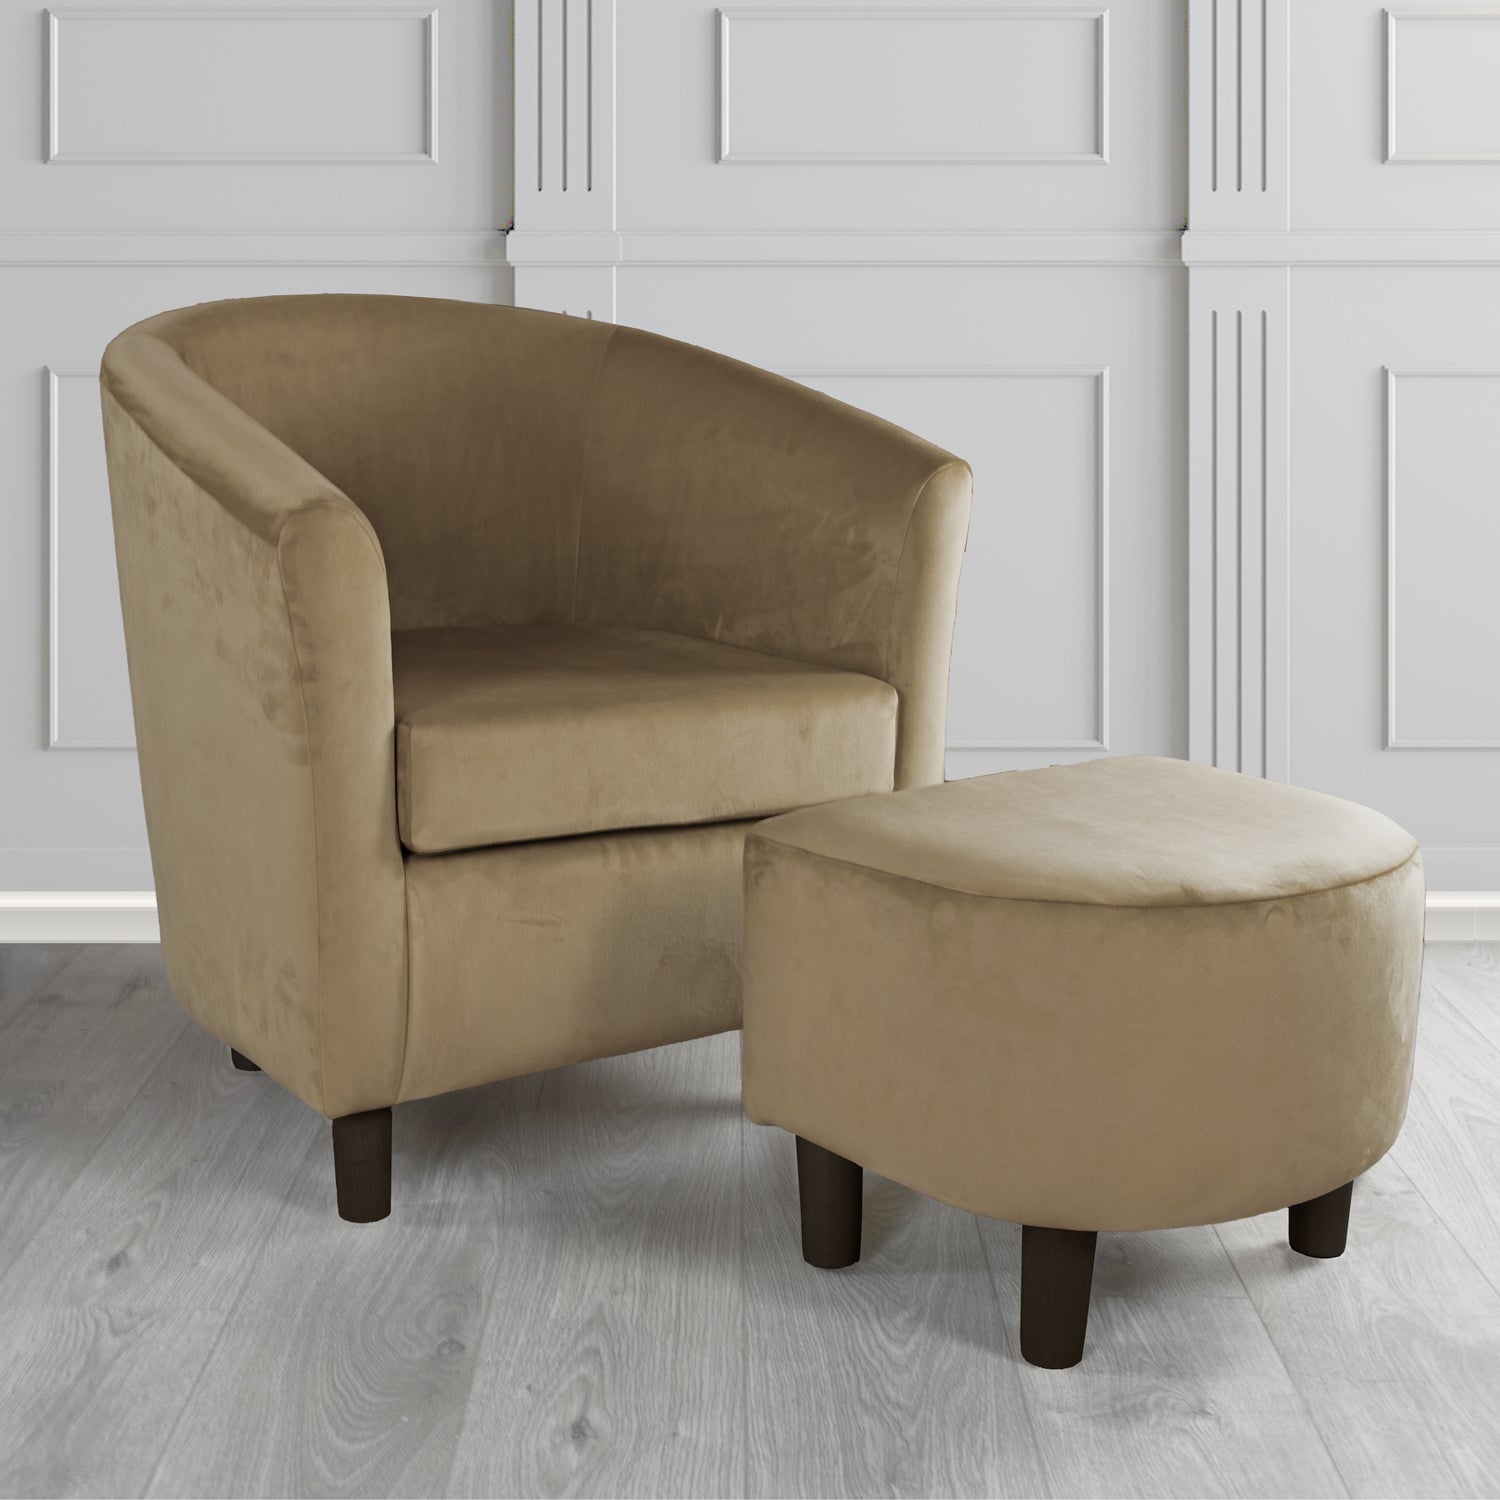 Tuscany Monaco Biscuit Plush Velvet Plain Fabric Tub Chair with Footstool Set (6592007307306)